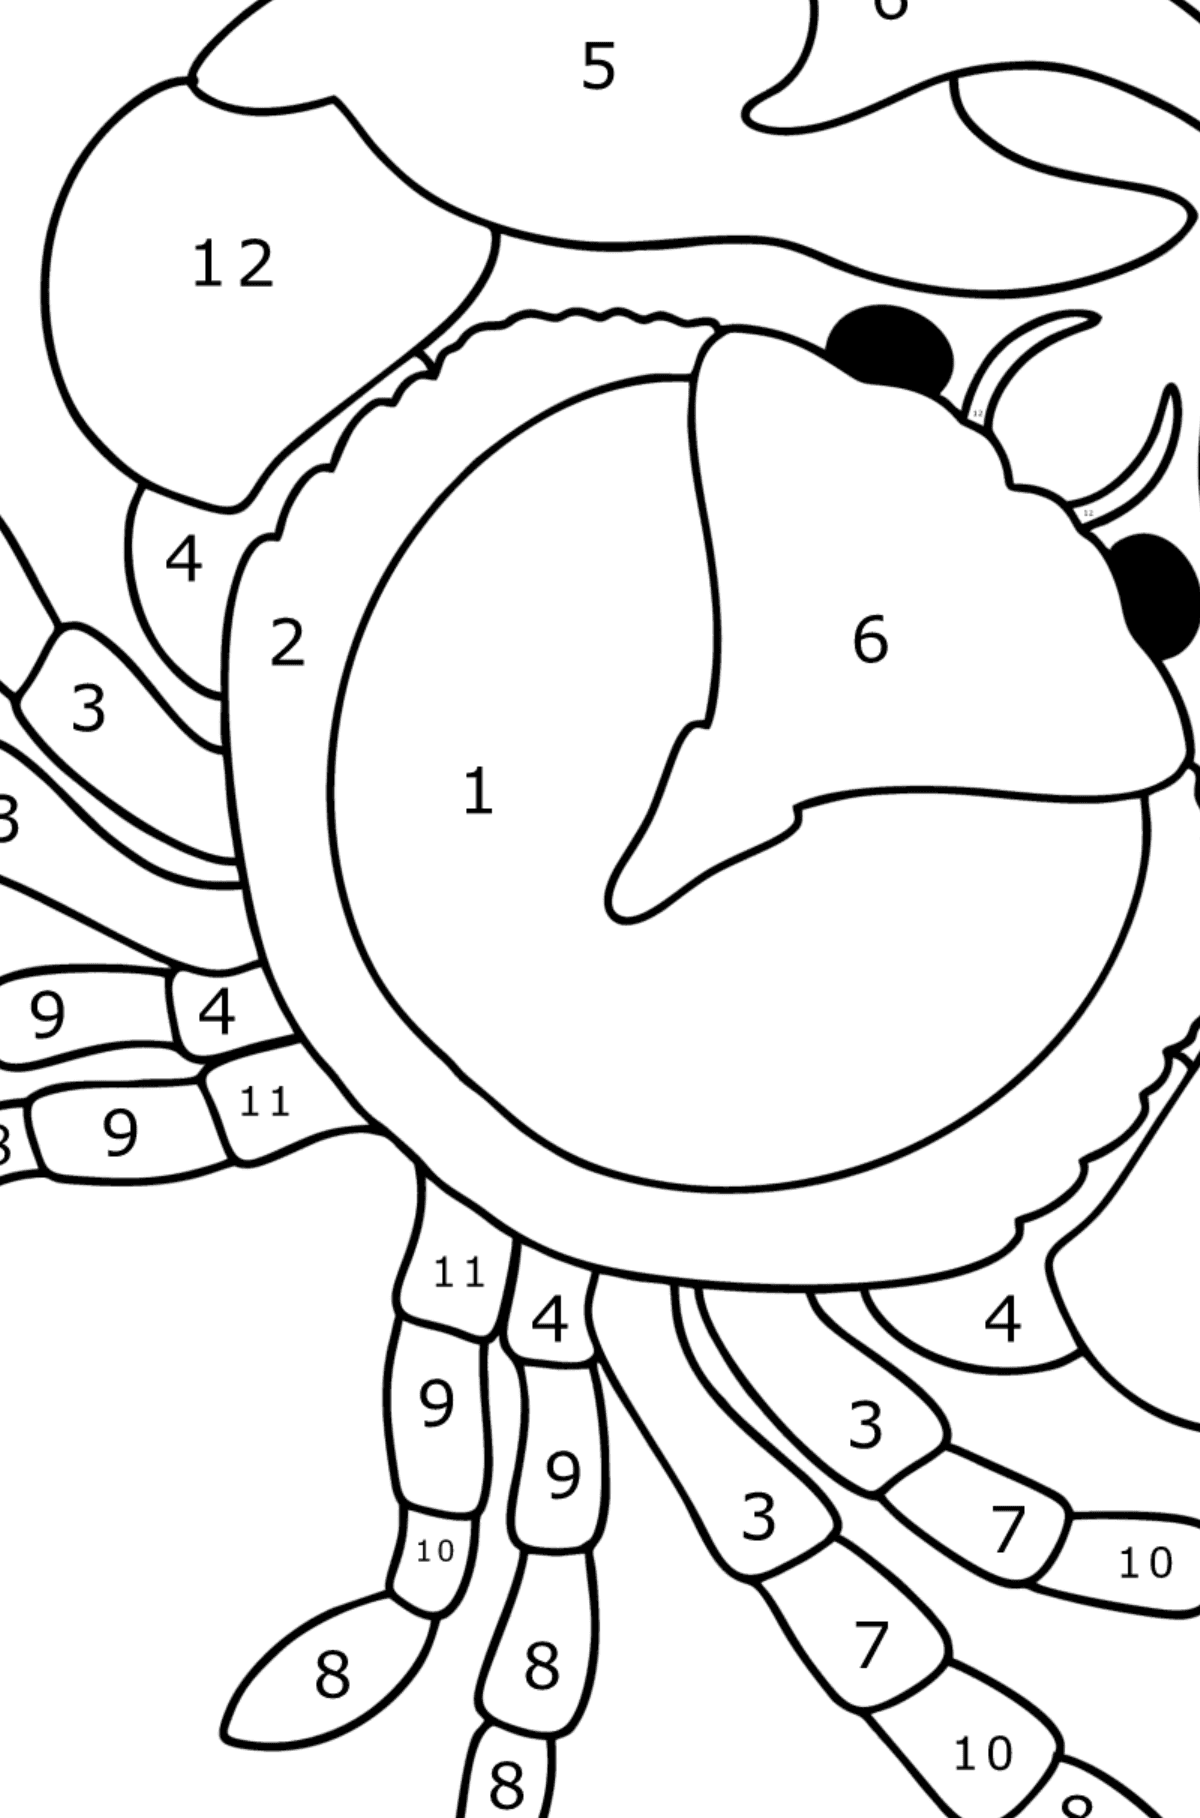 Sea ​​crab coloring page - Coloring by Numbers for Kids